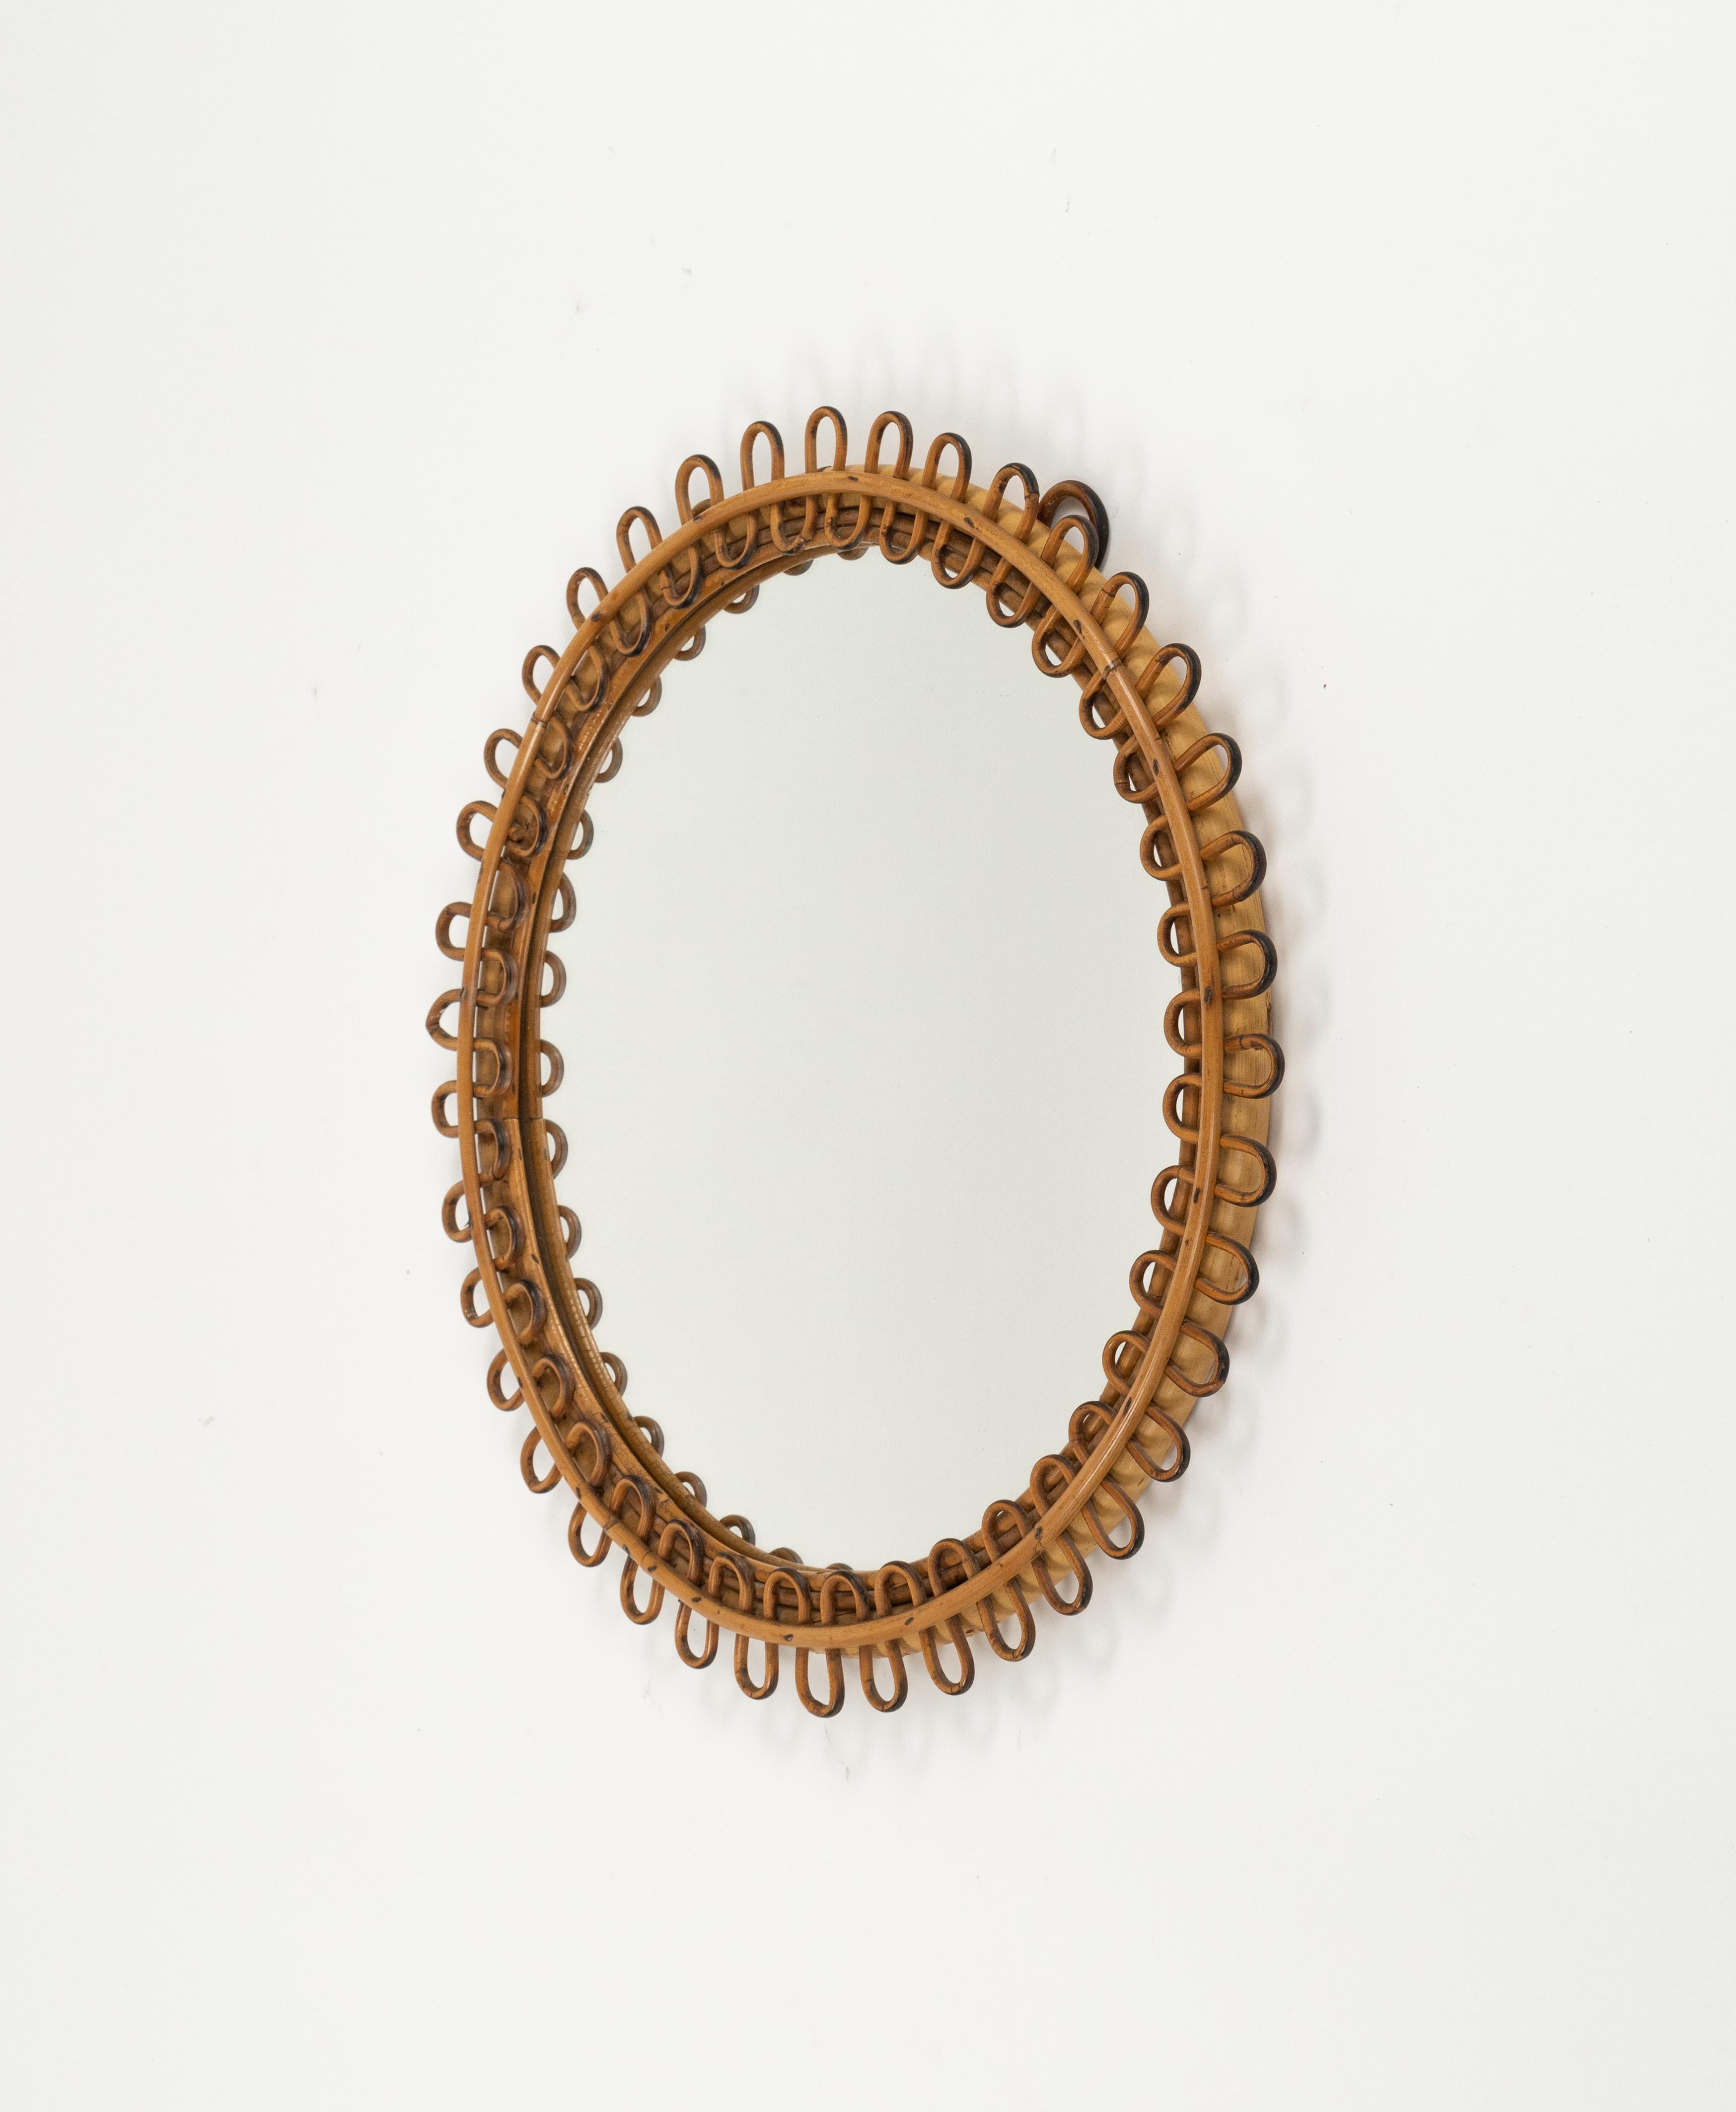 Midcentury Rattan and Bamboo Round Wall Mirror Franco Albini Style, Italy, 1960s For Sale 3